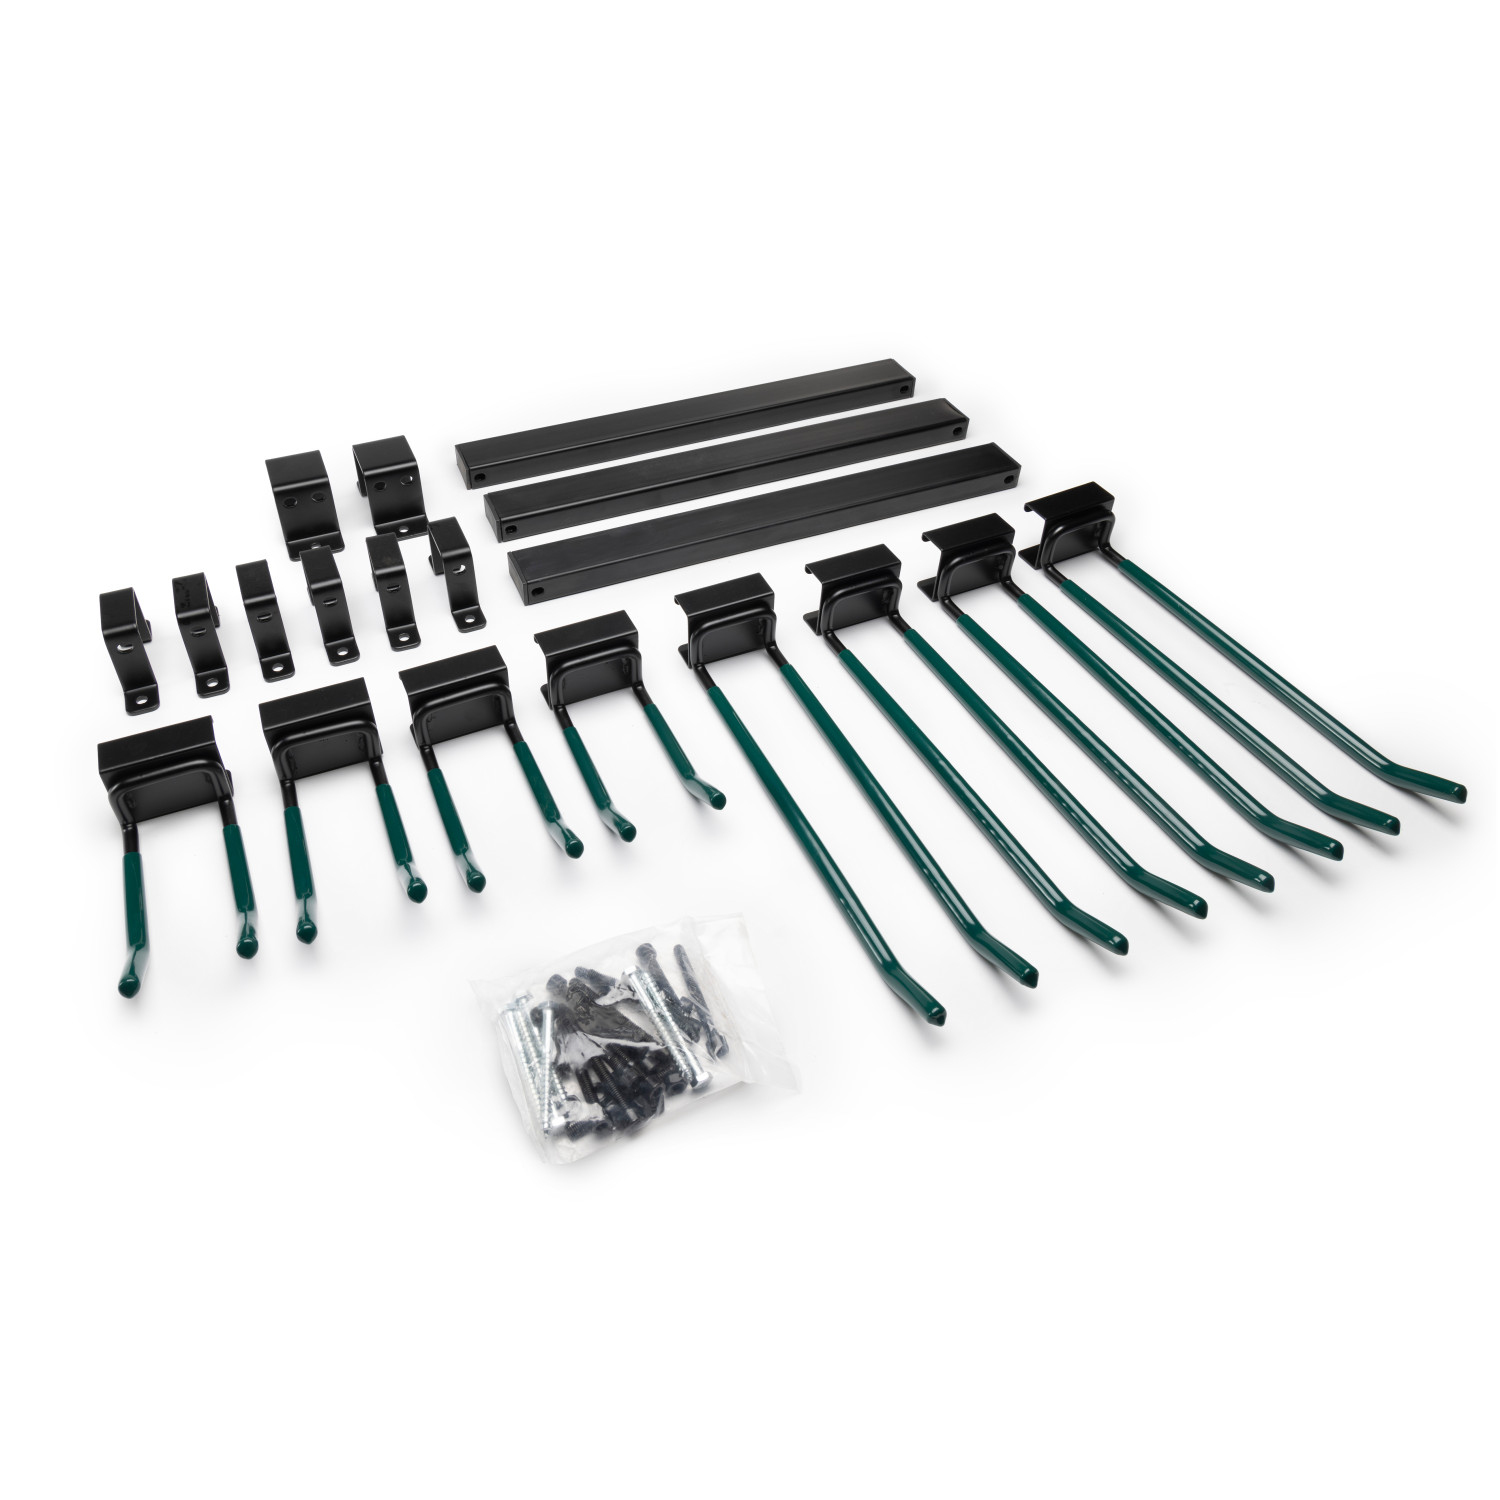 Industrial Grade 48 Garage Tool Organizer with 6 Hooks and 1 Cart/Bike Rack,  500 lbs. Total Holding Weight buy in stock in U.S. in IDL Packaging